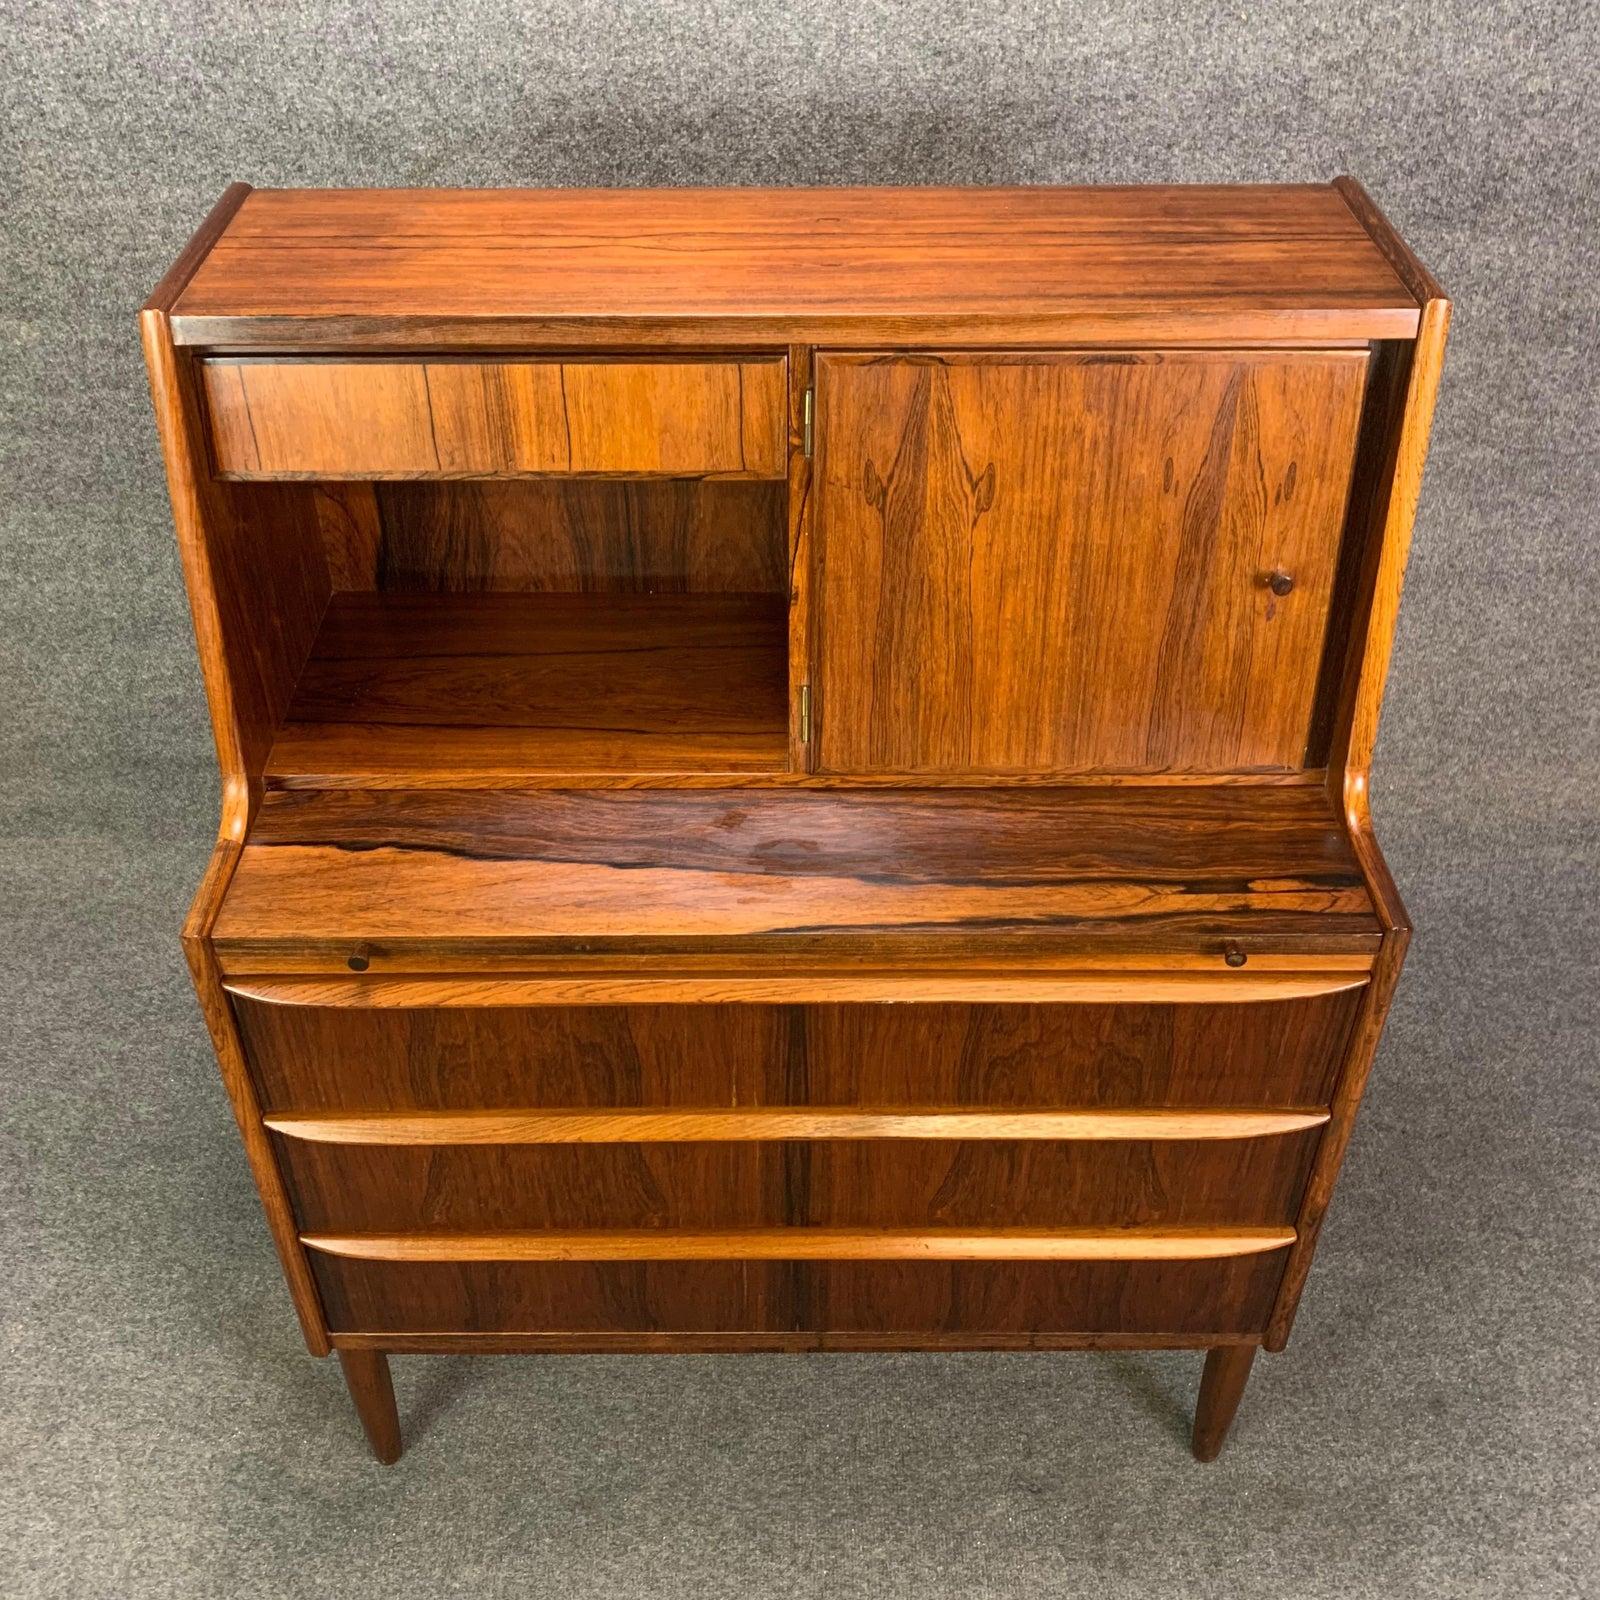 Here is a beautiful Scandinavian Modern secretary desk in rosewood manufactured in Denmark in the 1960s.
This case piece features a vibrant wood grain, a small drawer and cubby on its top plus a door opening to reveal an extra storage space and a